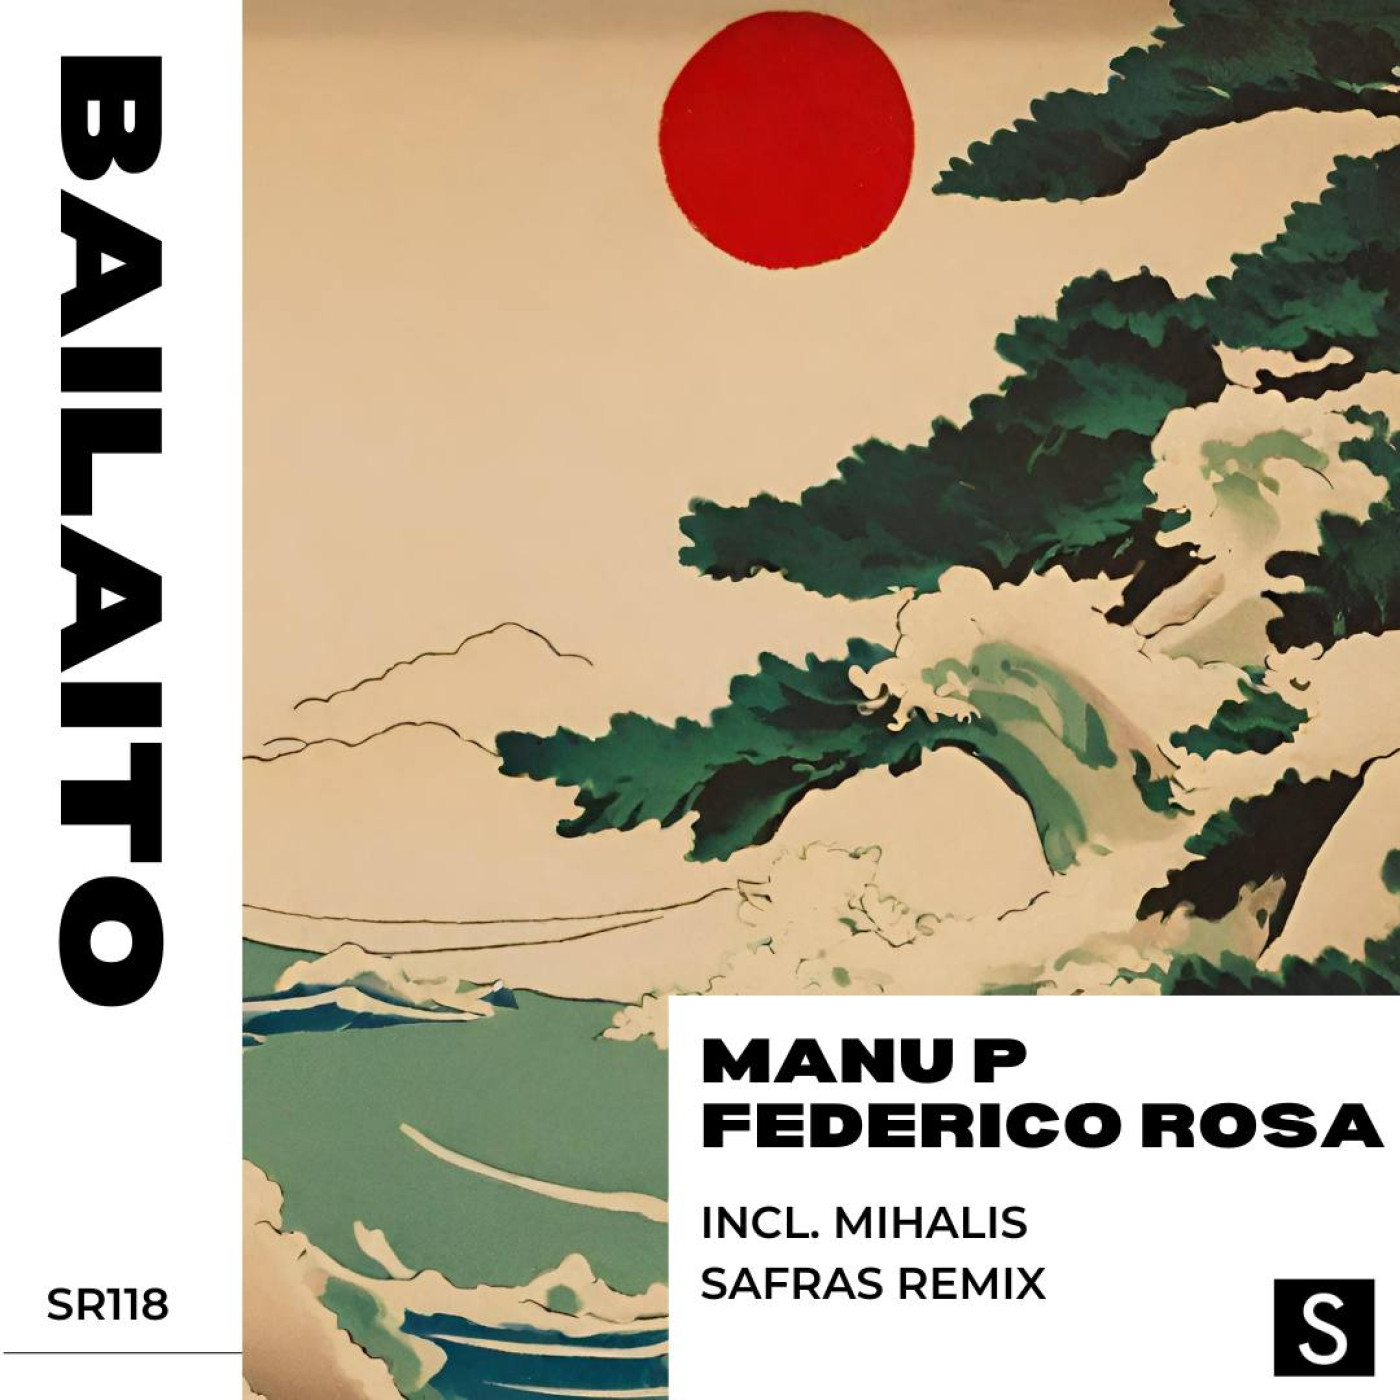 Introducing 'Bailaito': a New Tech House Gem From Manu P and Federico Rosa